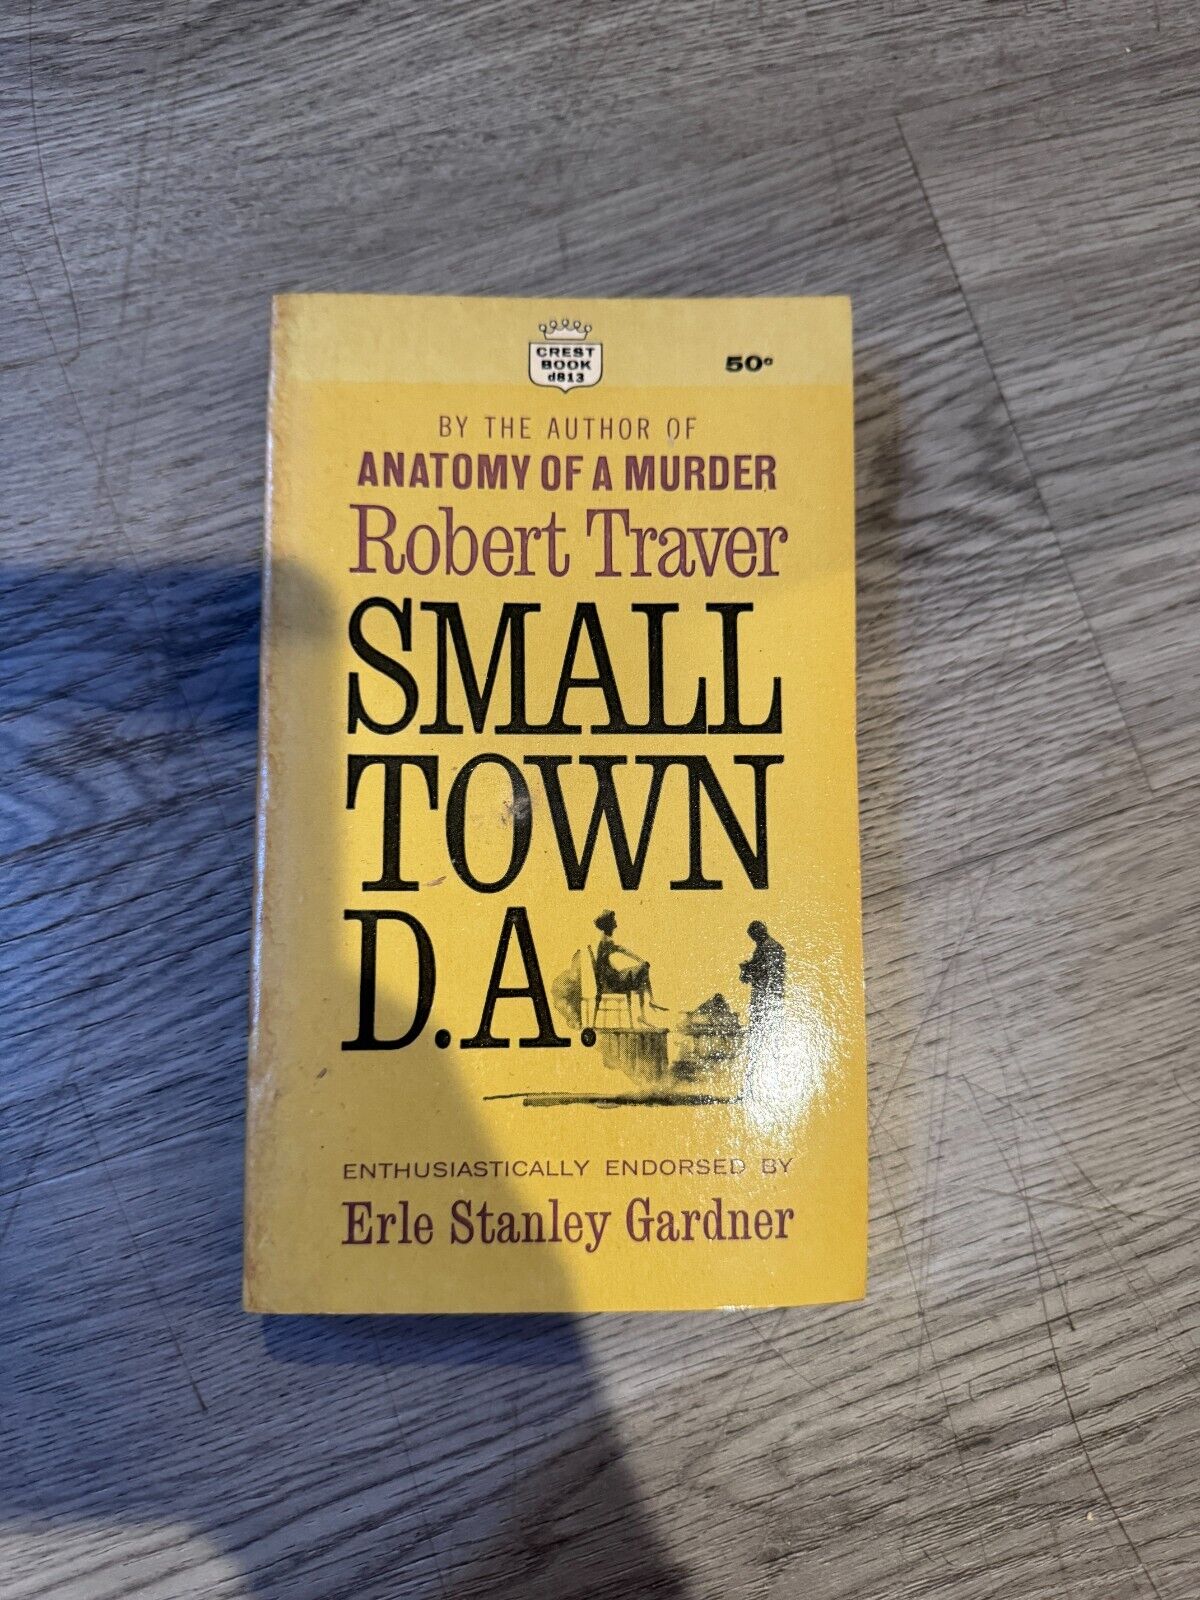 Small Town D. A. Robert Traver Published by Crest Book, 1961